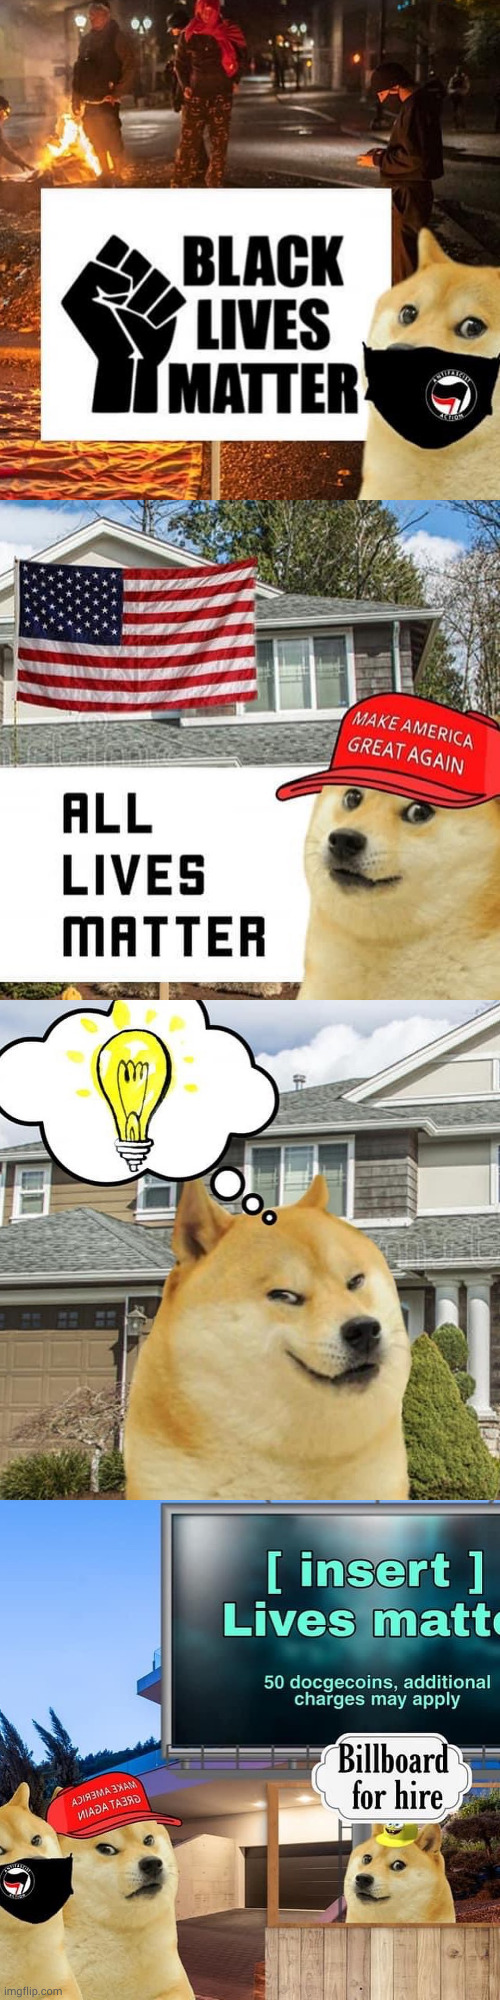 image tagged in political meme,ancap,capitalism,funny memes,doge | made w/ Imgflip meme maker